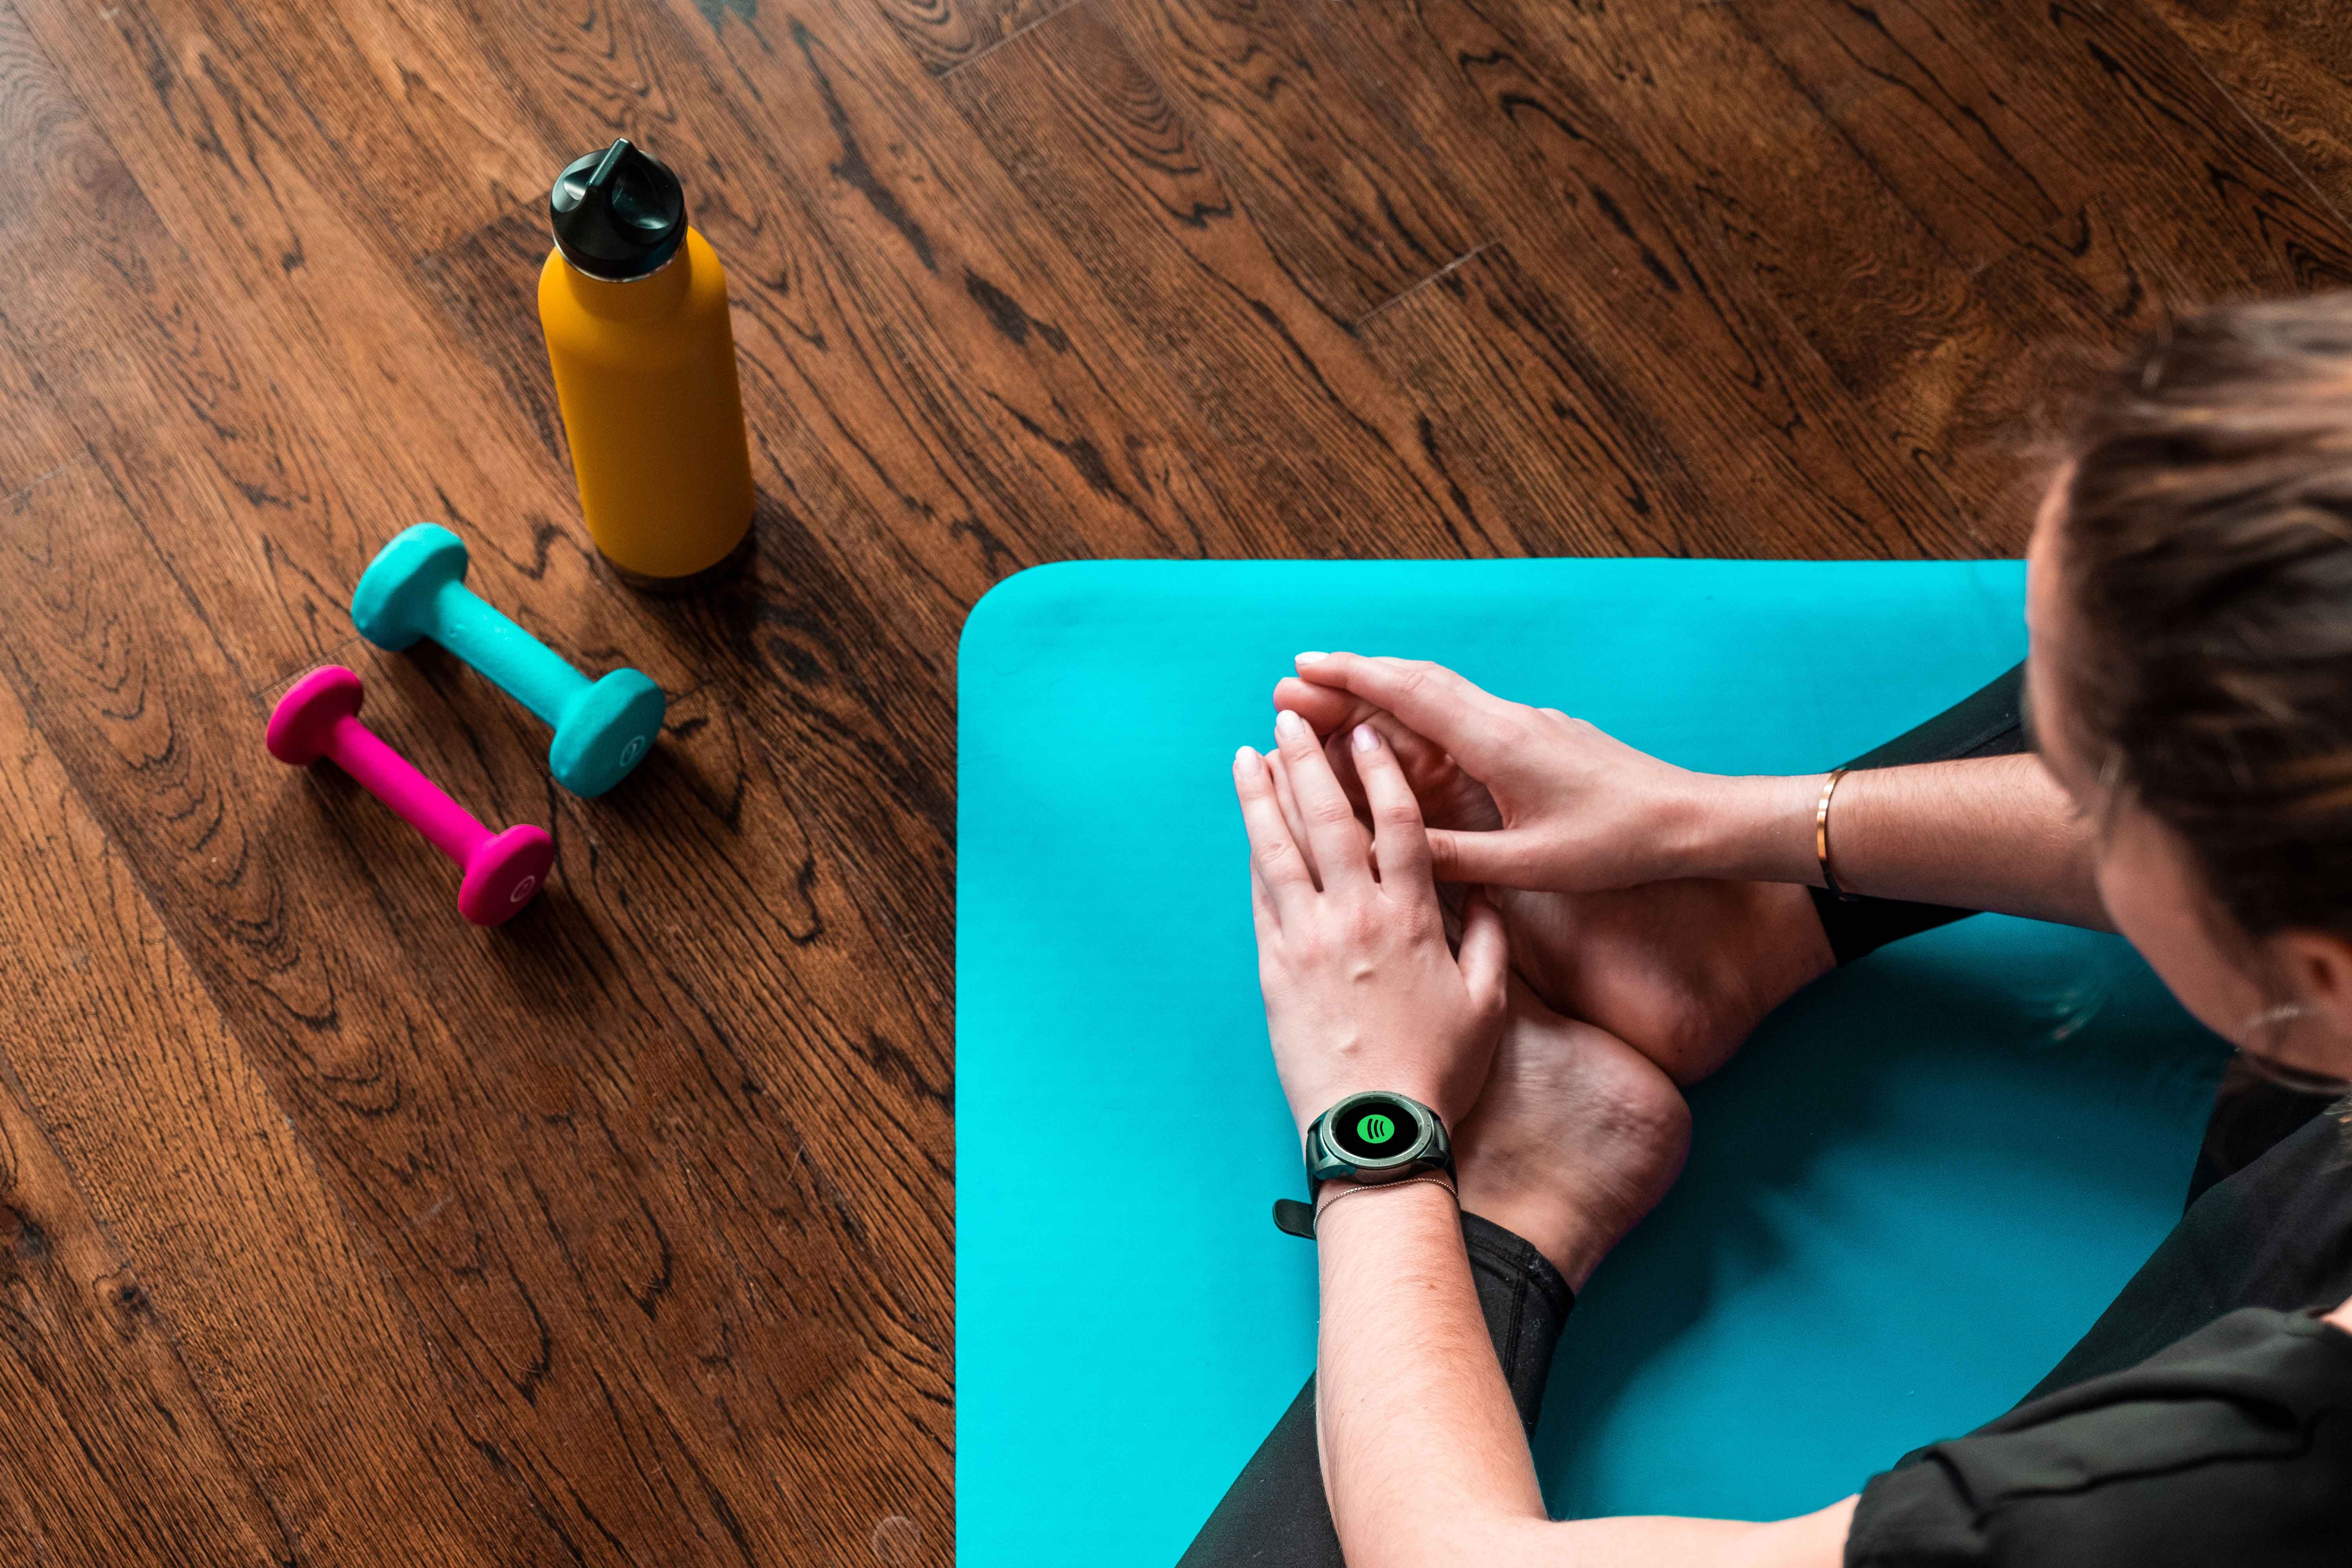 Woman stretching while wearing Galaxy Watch that shows Spotify pairing